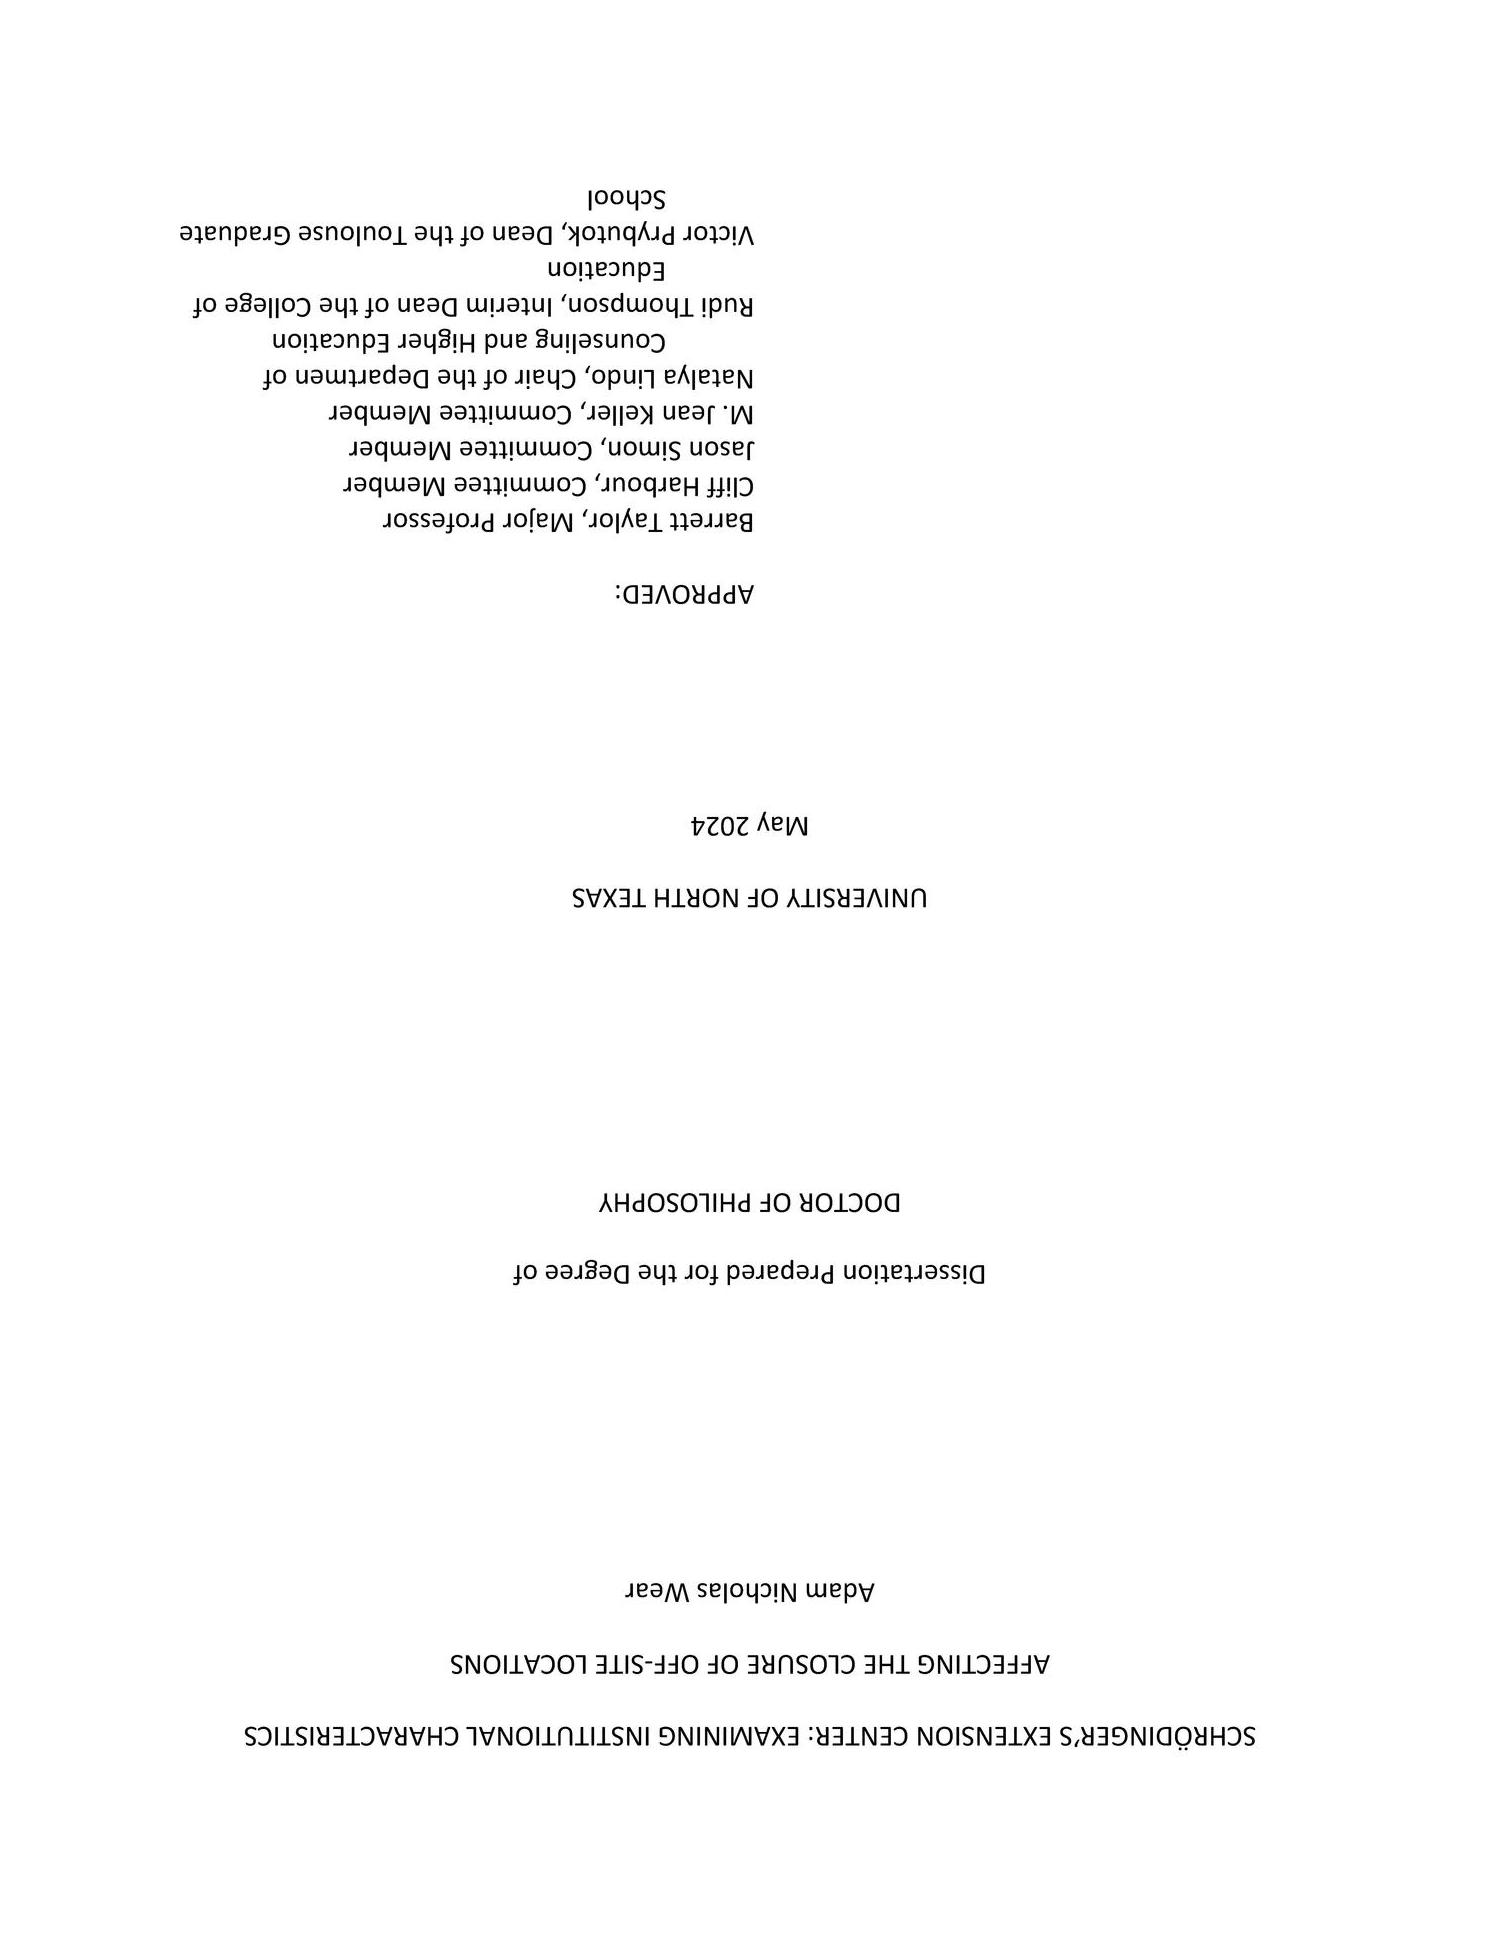 Schrödinger's Extension Center: Examining Institutional Characteristics Affecting the Closure of Off-Site Locations
                                                
                                                    Title Page
                                                